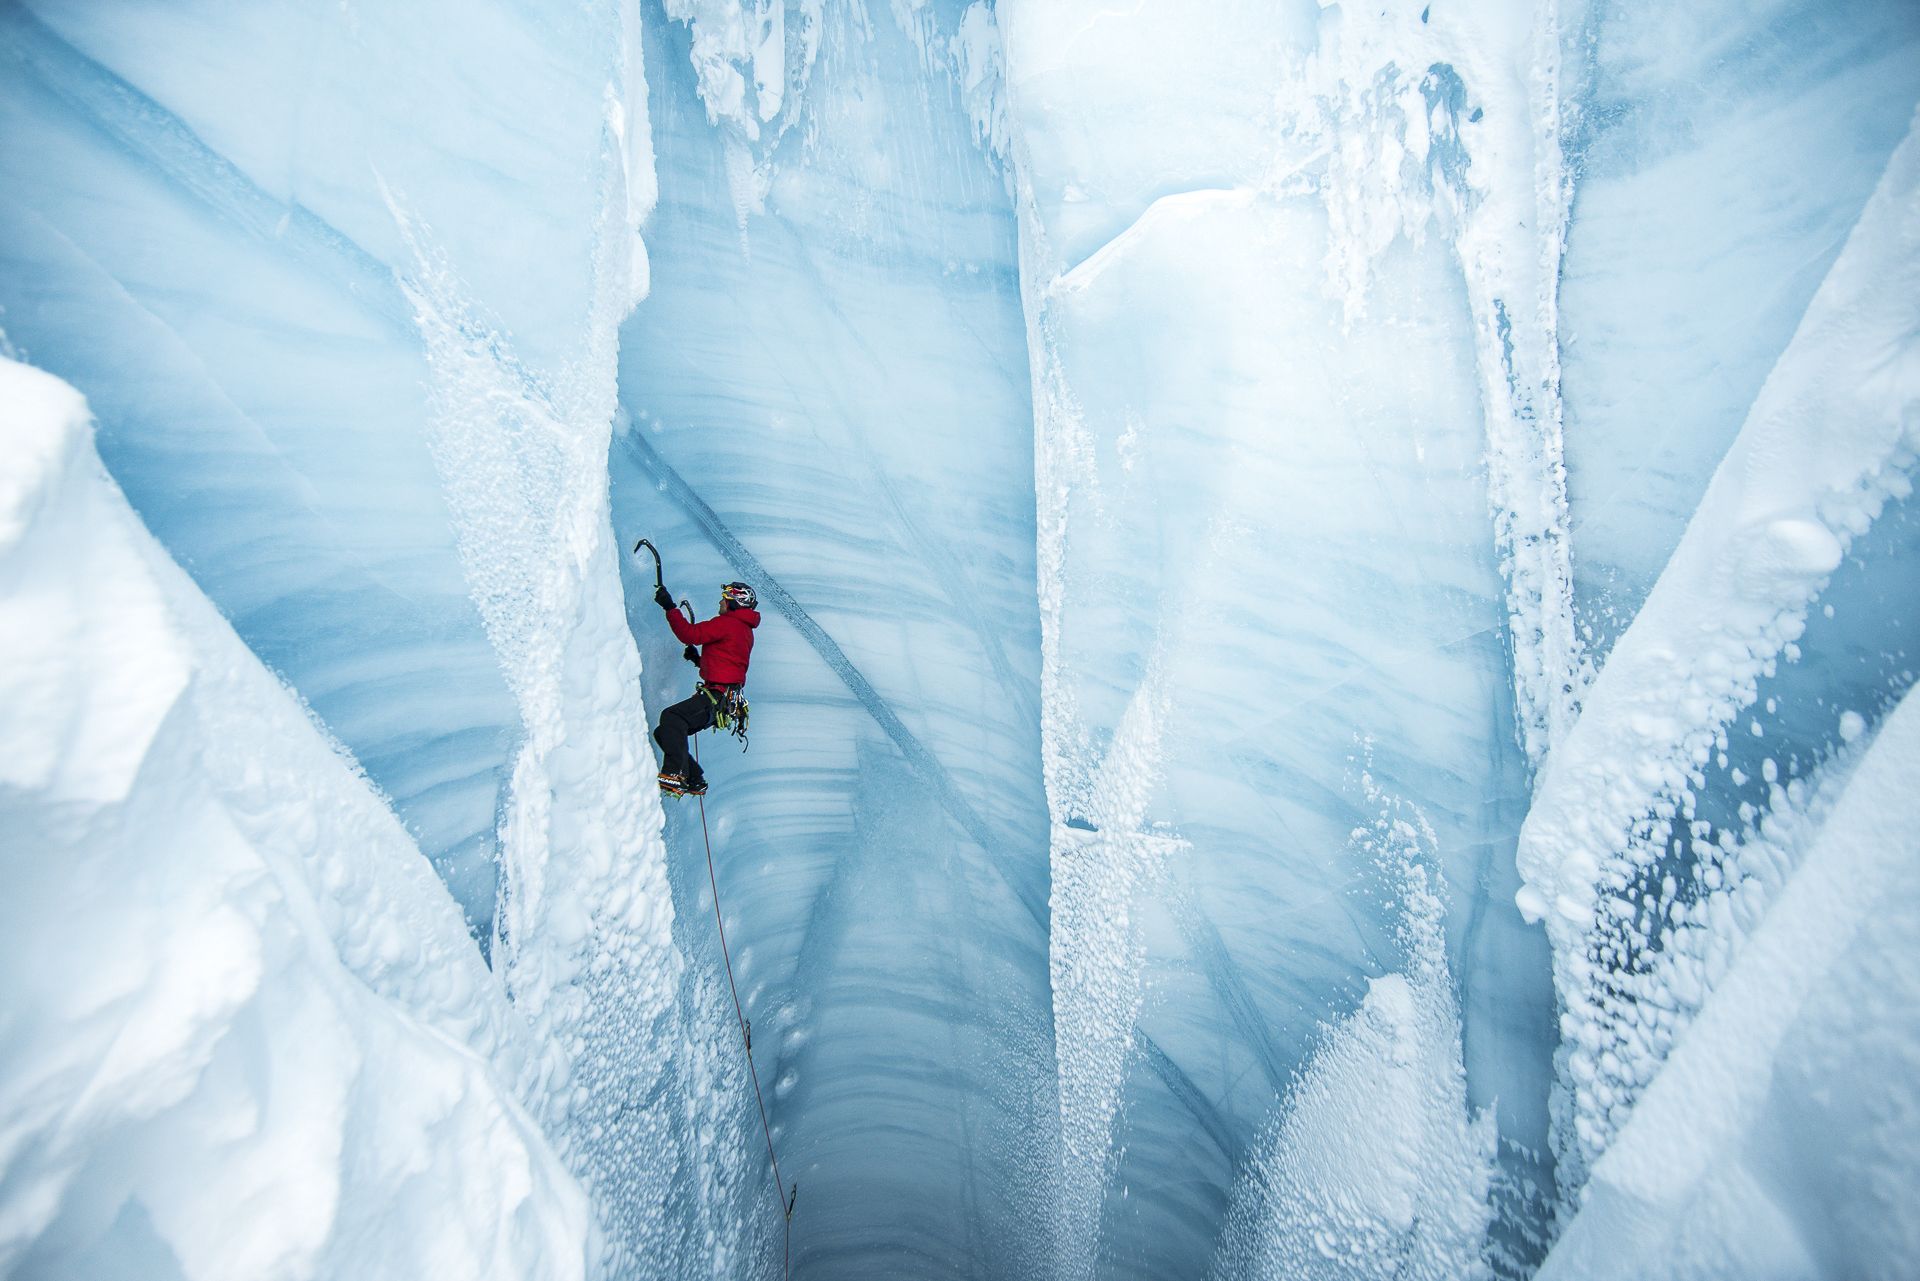 BENEATH THE ICE - Christian Pondella (USA) - Highly Commended WINTER MOUNTAIN SPORTS.jpg